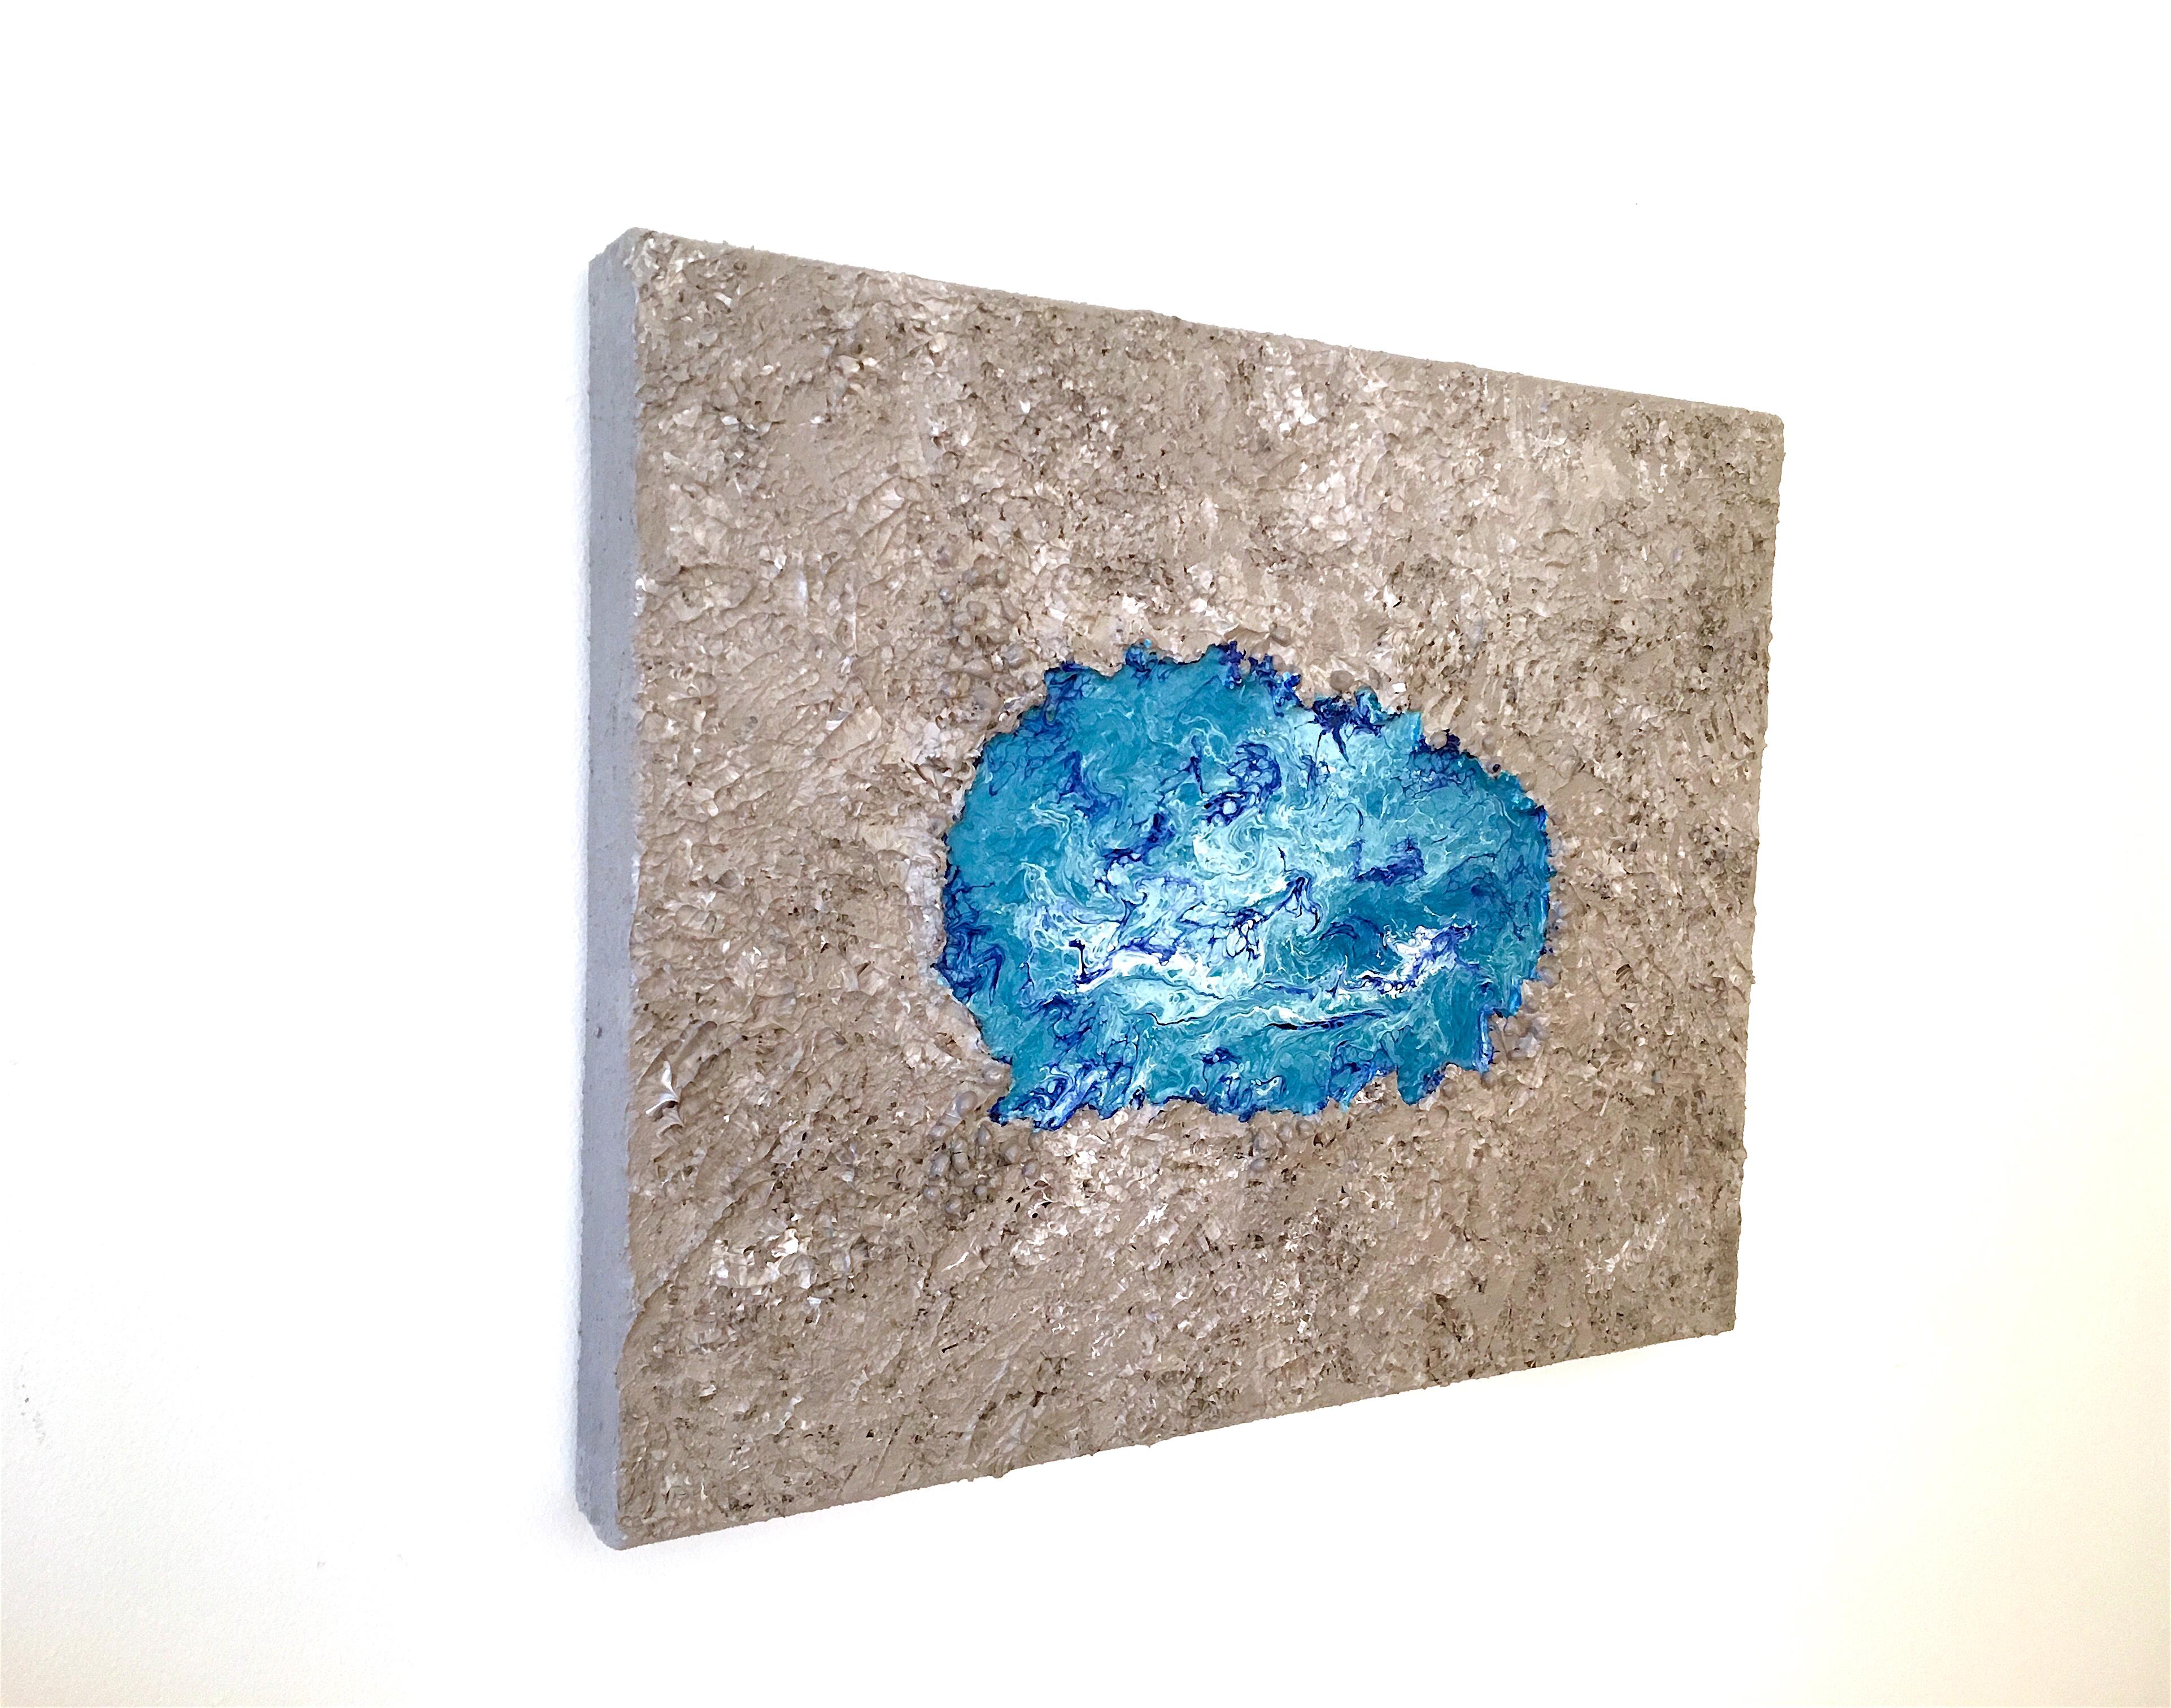 Abstract painting on canvas with heavy texture.
Acrylic and varnish for protection.
Colors: Blue sand
This painting is called Coastline 3 and numbered 242.
Original and signed by the artist, comes with gallery certificate.